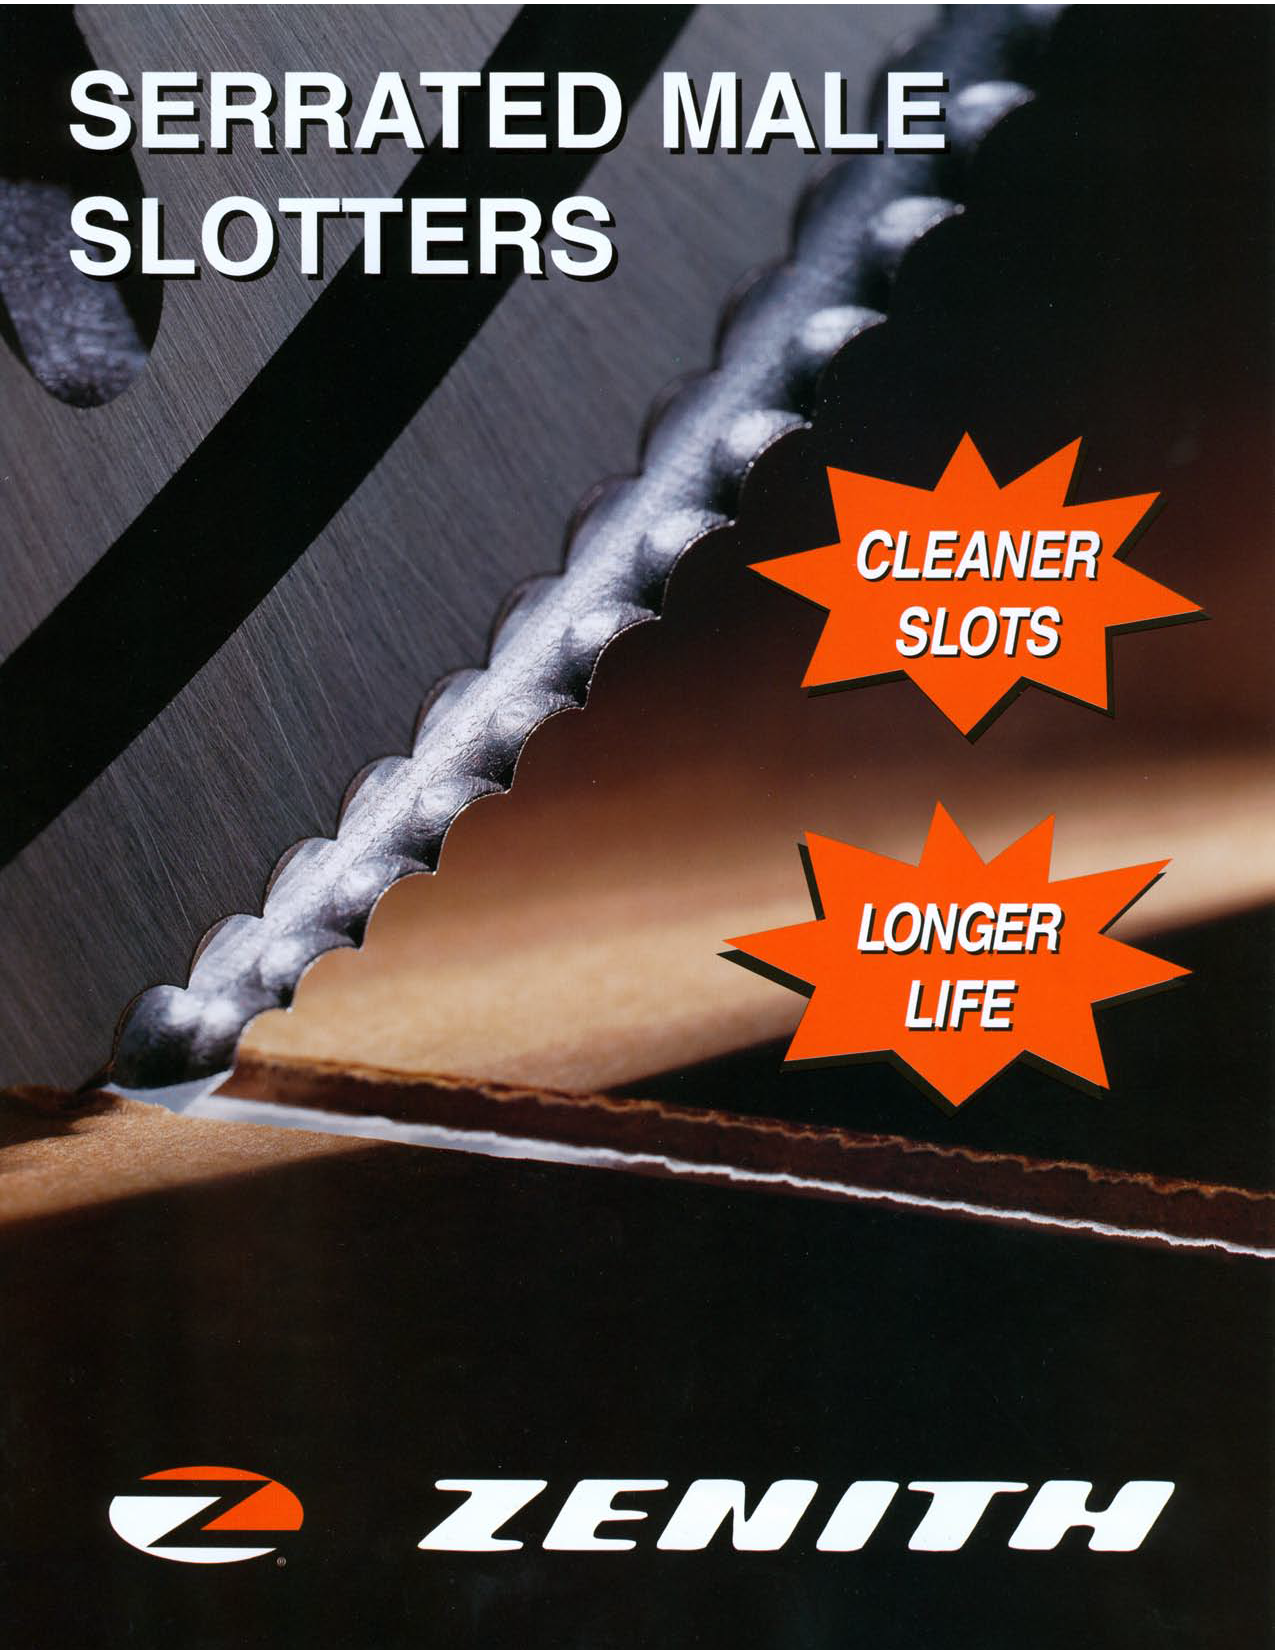 Learn more about the Serrated Male Slotters in the Zenith brochure